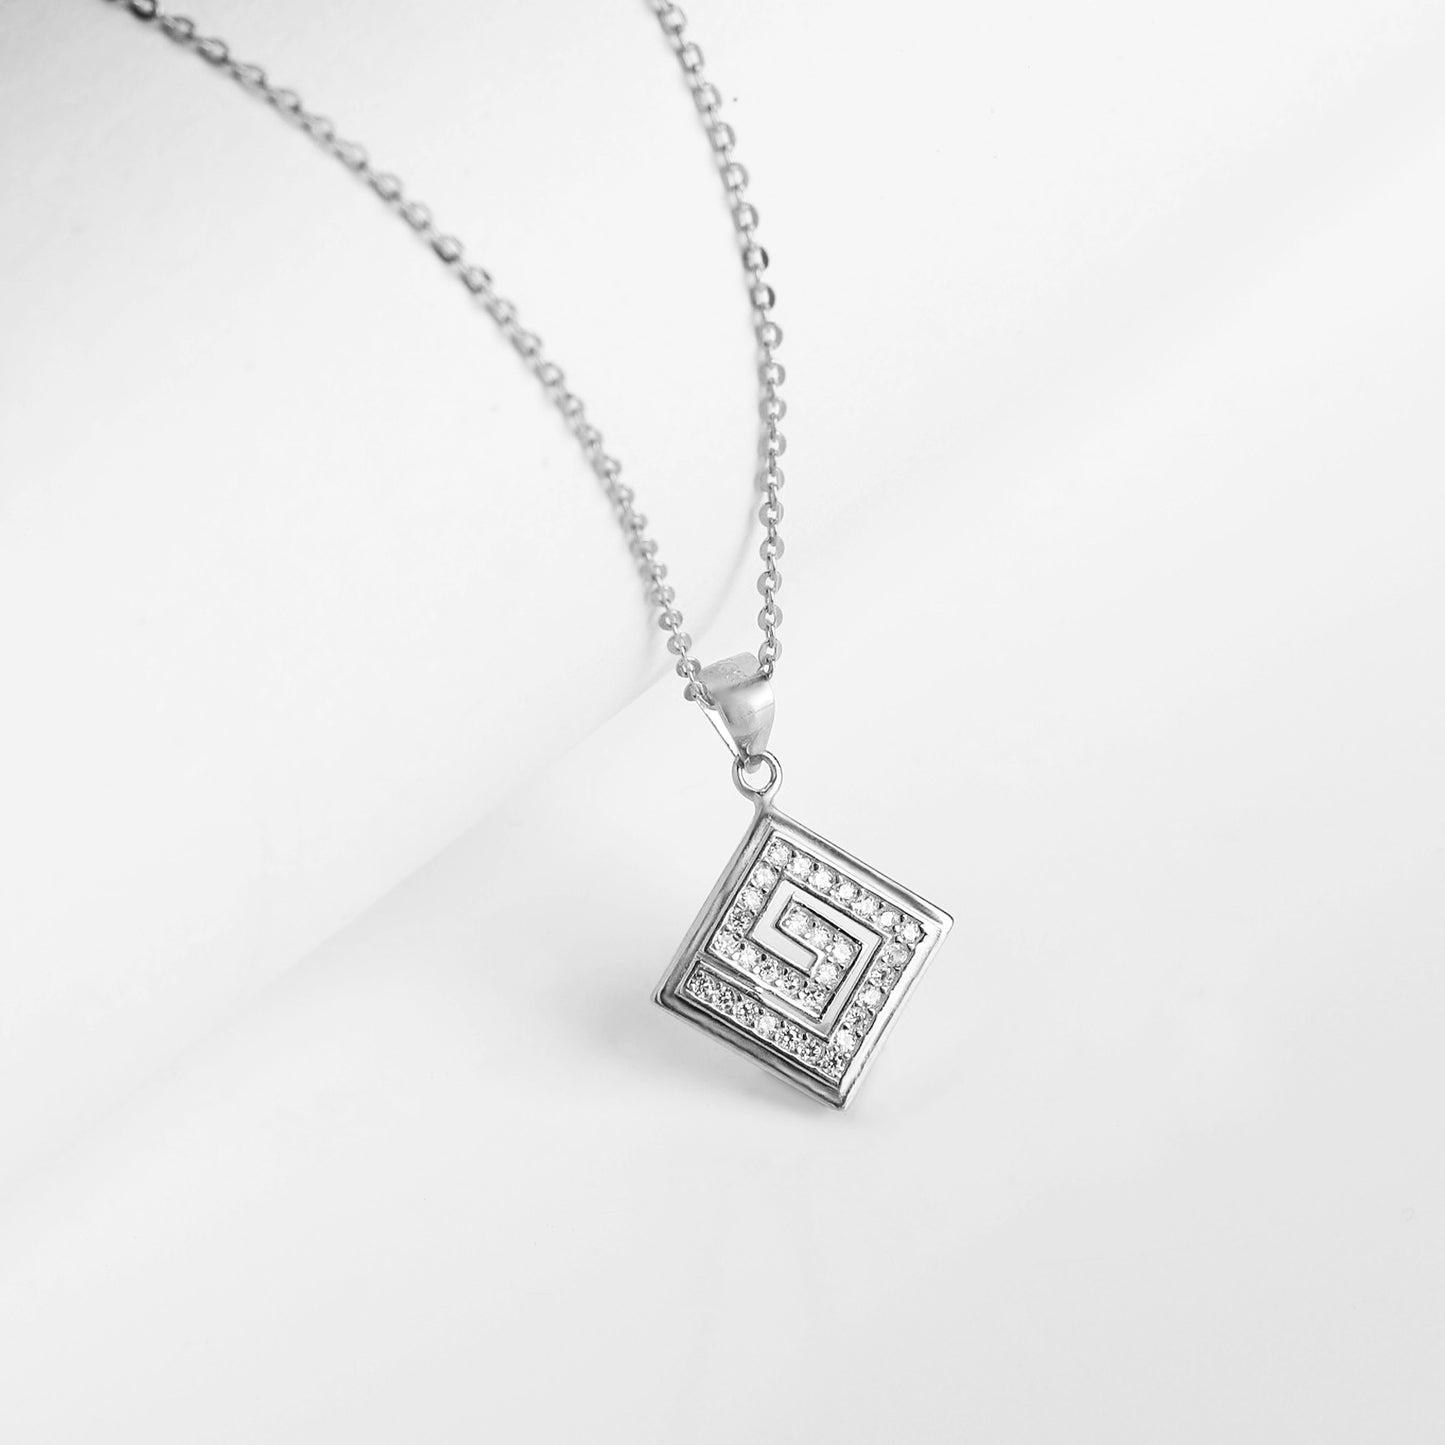 Silver Zircon Maze Pendant with Link Chain